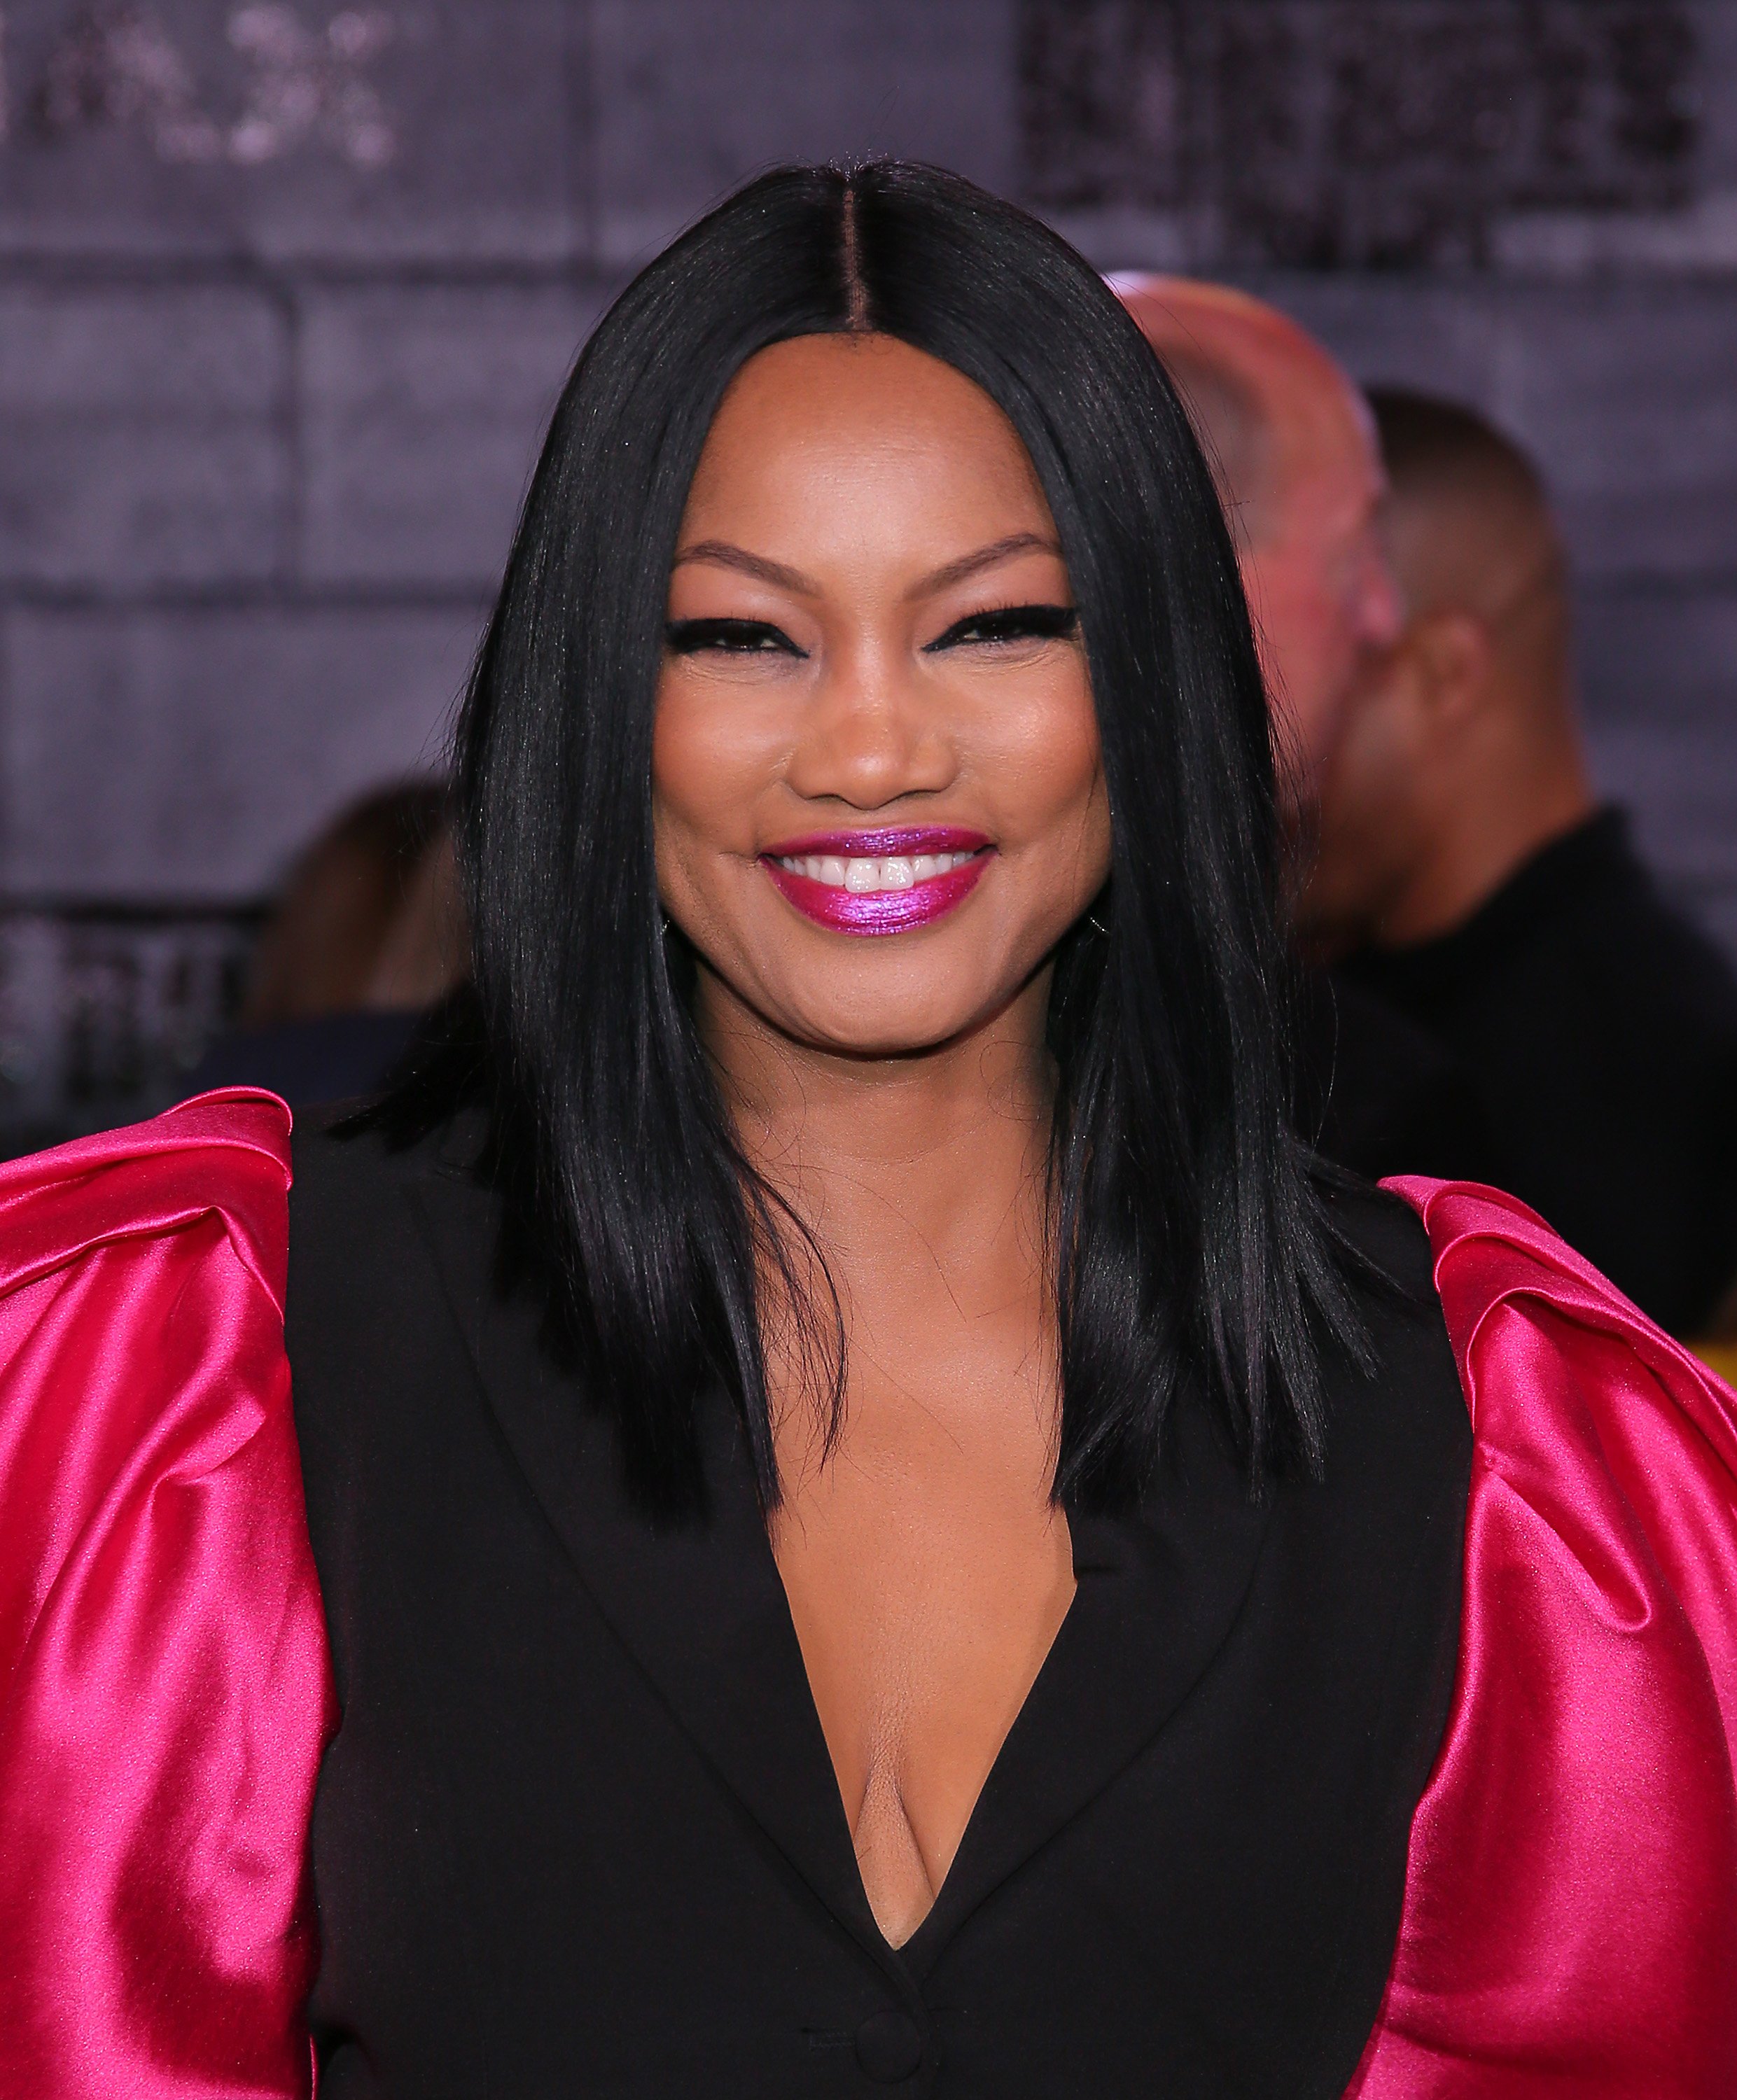 Garcelle Beauvais at the "Bad Boys for Life" world premiere at TCL Chinese Theatre on January 14, 2020 in Hollywood, California.| Source: Getty Images